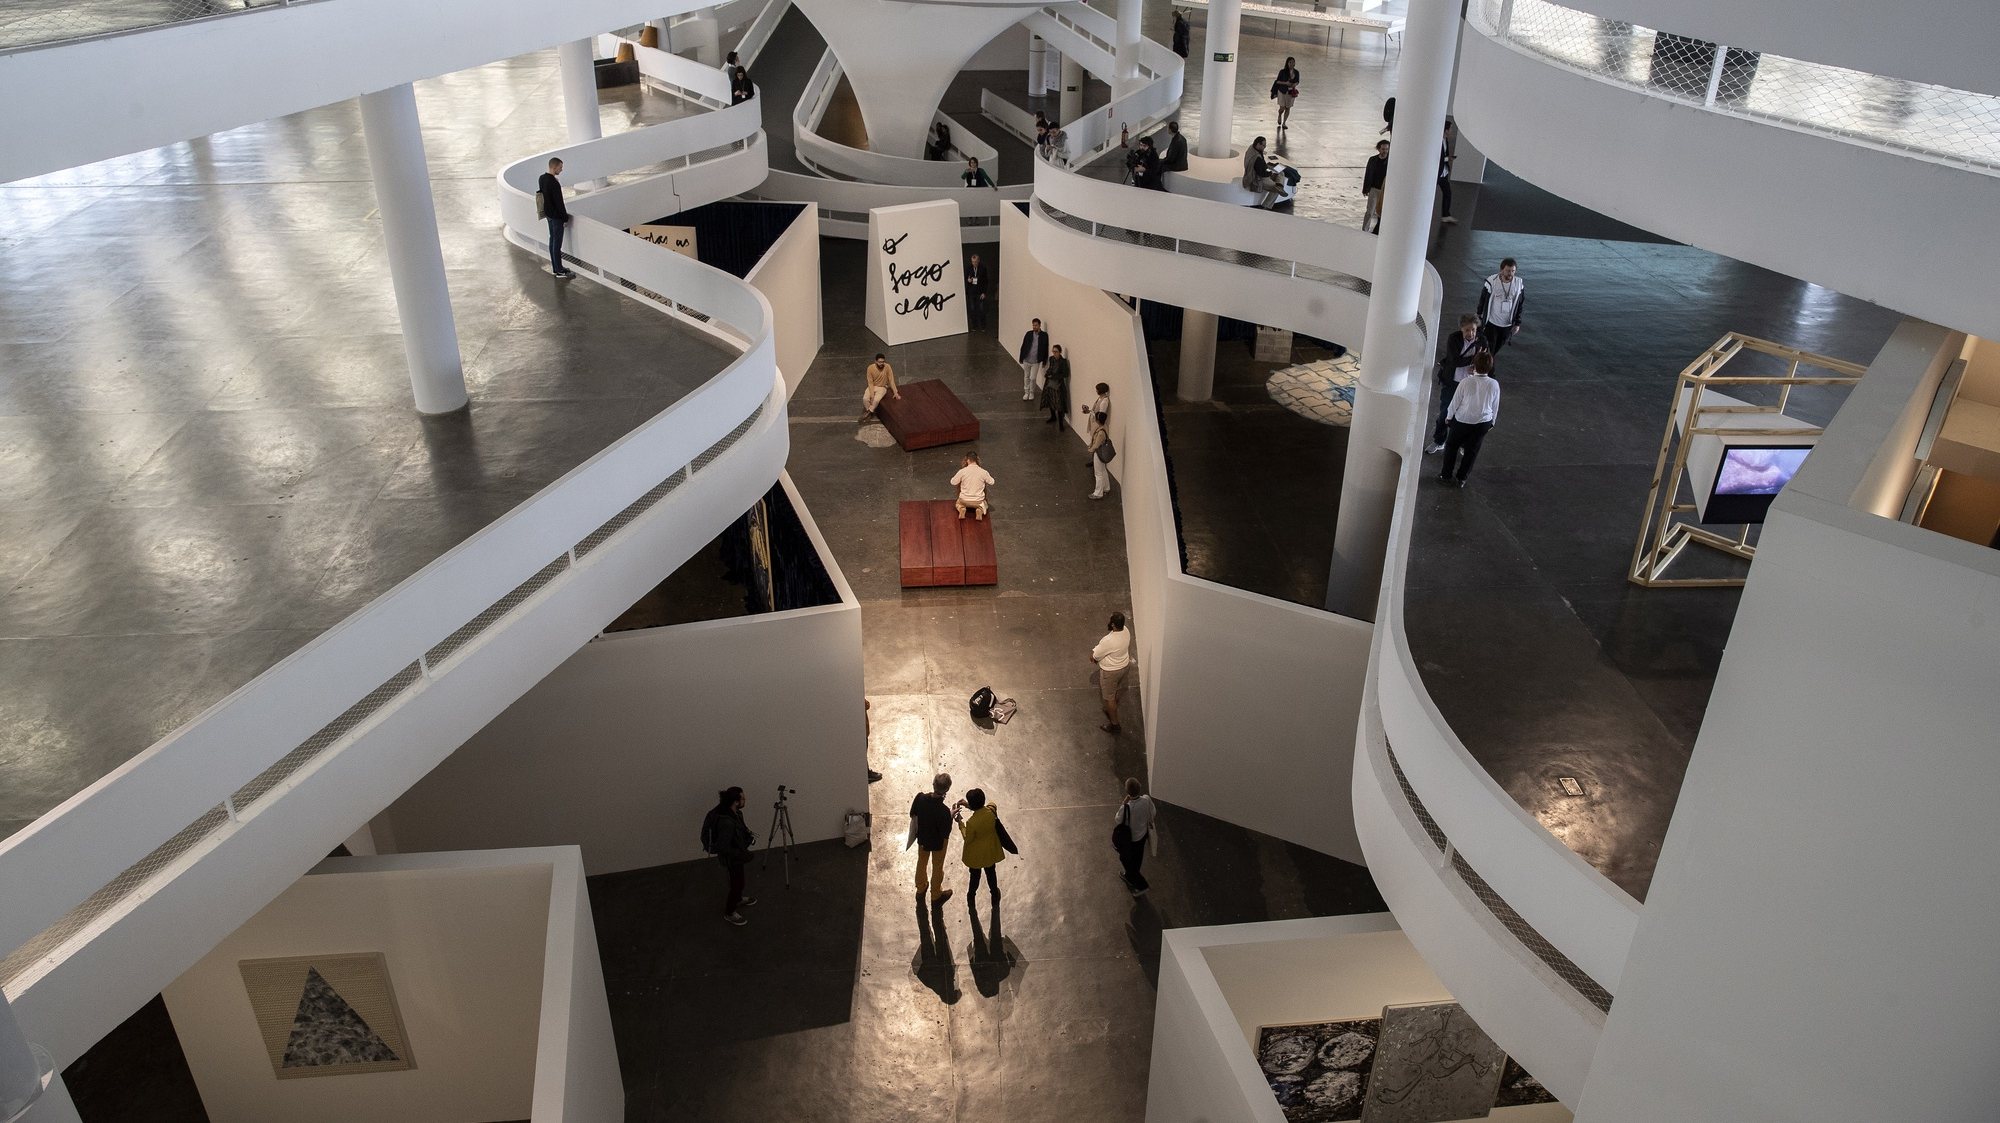 epa06997404 General view of the pavilion of the Ibirapuera Park Biennial in Sao Paulo, Brazil, 04 September 2018. The thirty-third Biennial of Sao Paulo, which will open its doors to the public this Friday, will gather some 600 works of art from around a hundred artists from different countries in search of a fragmented and diverse vision of the world.  EPA/Sebastiao Moreira